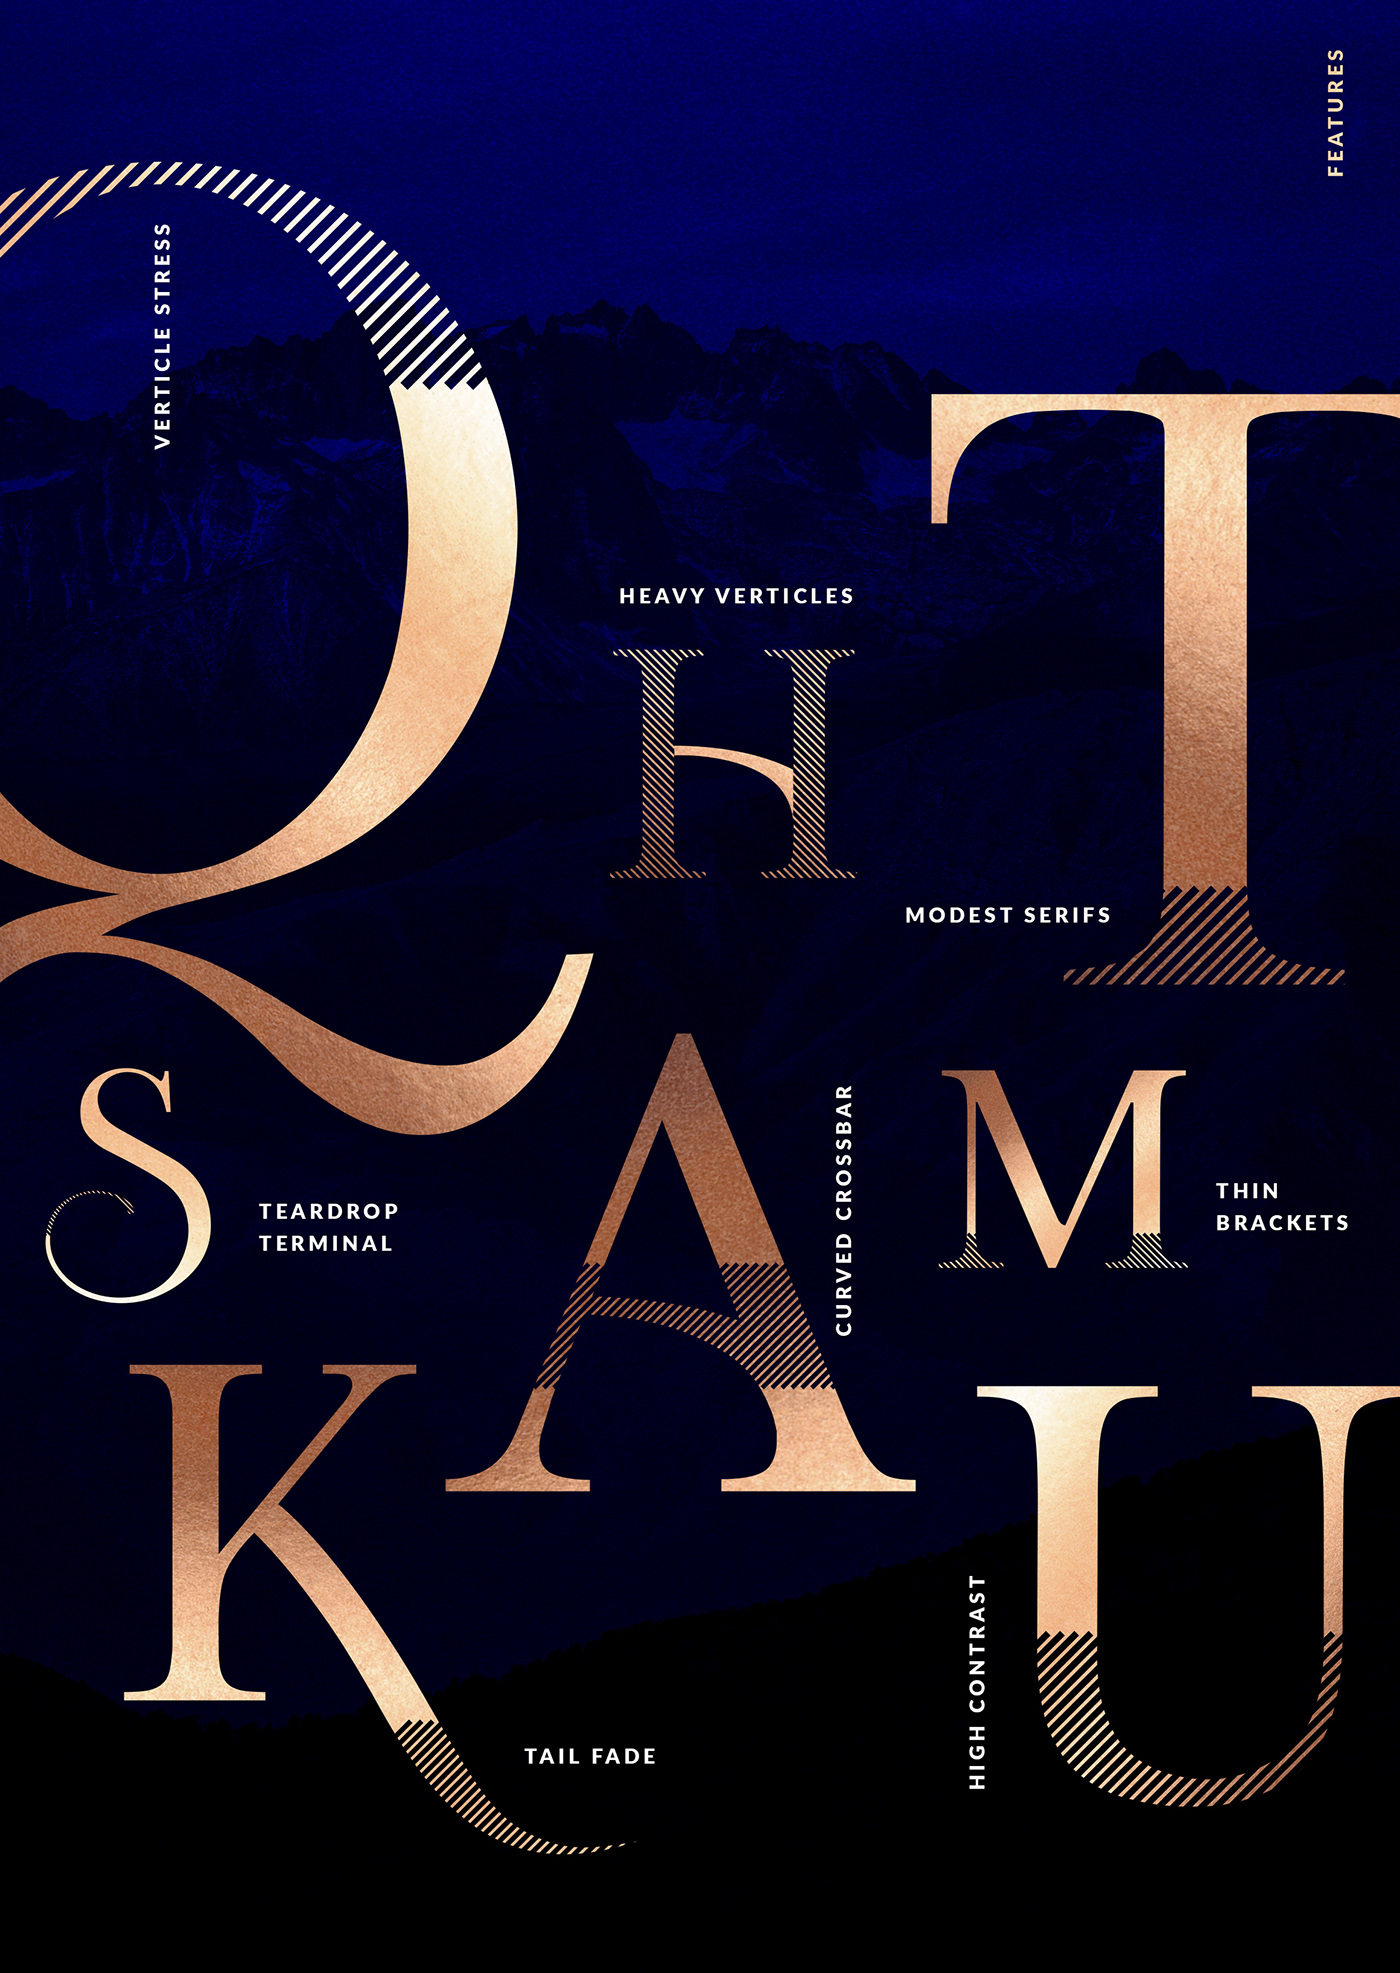 Lucy Rose Typeface